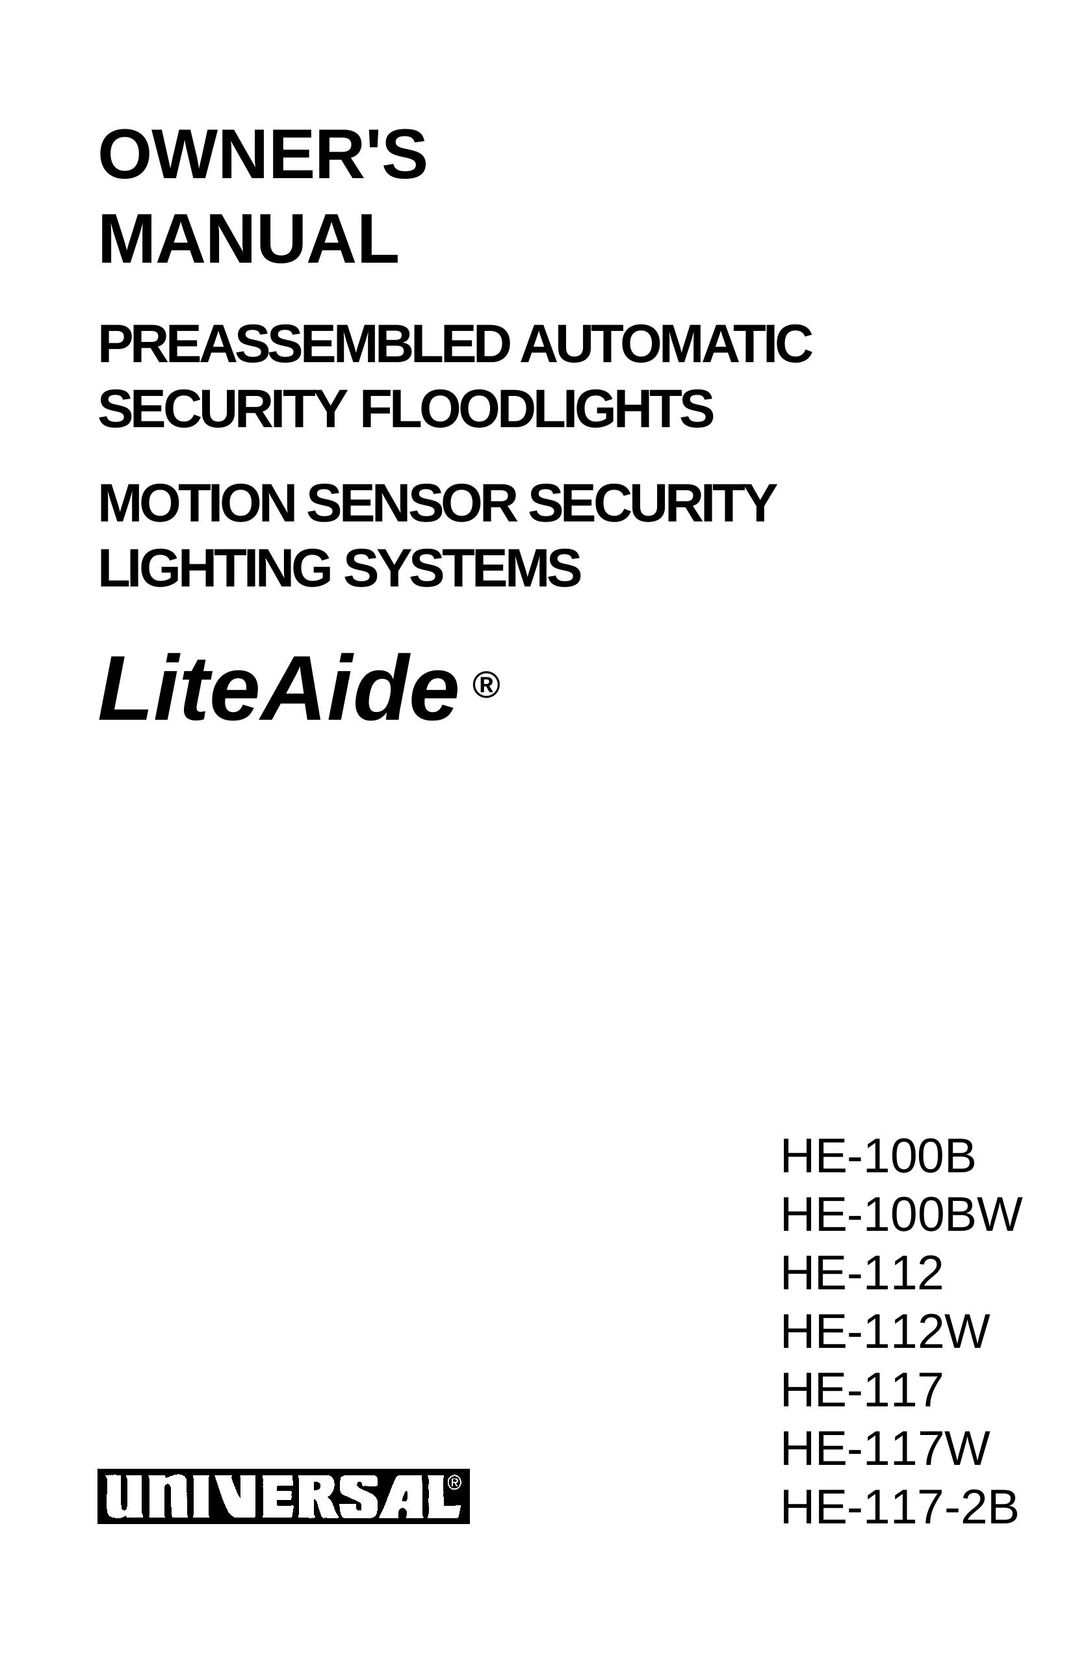 Universal HE-112W Home Security System User Manual